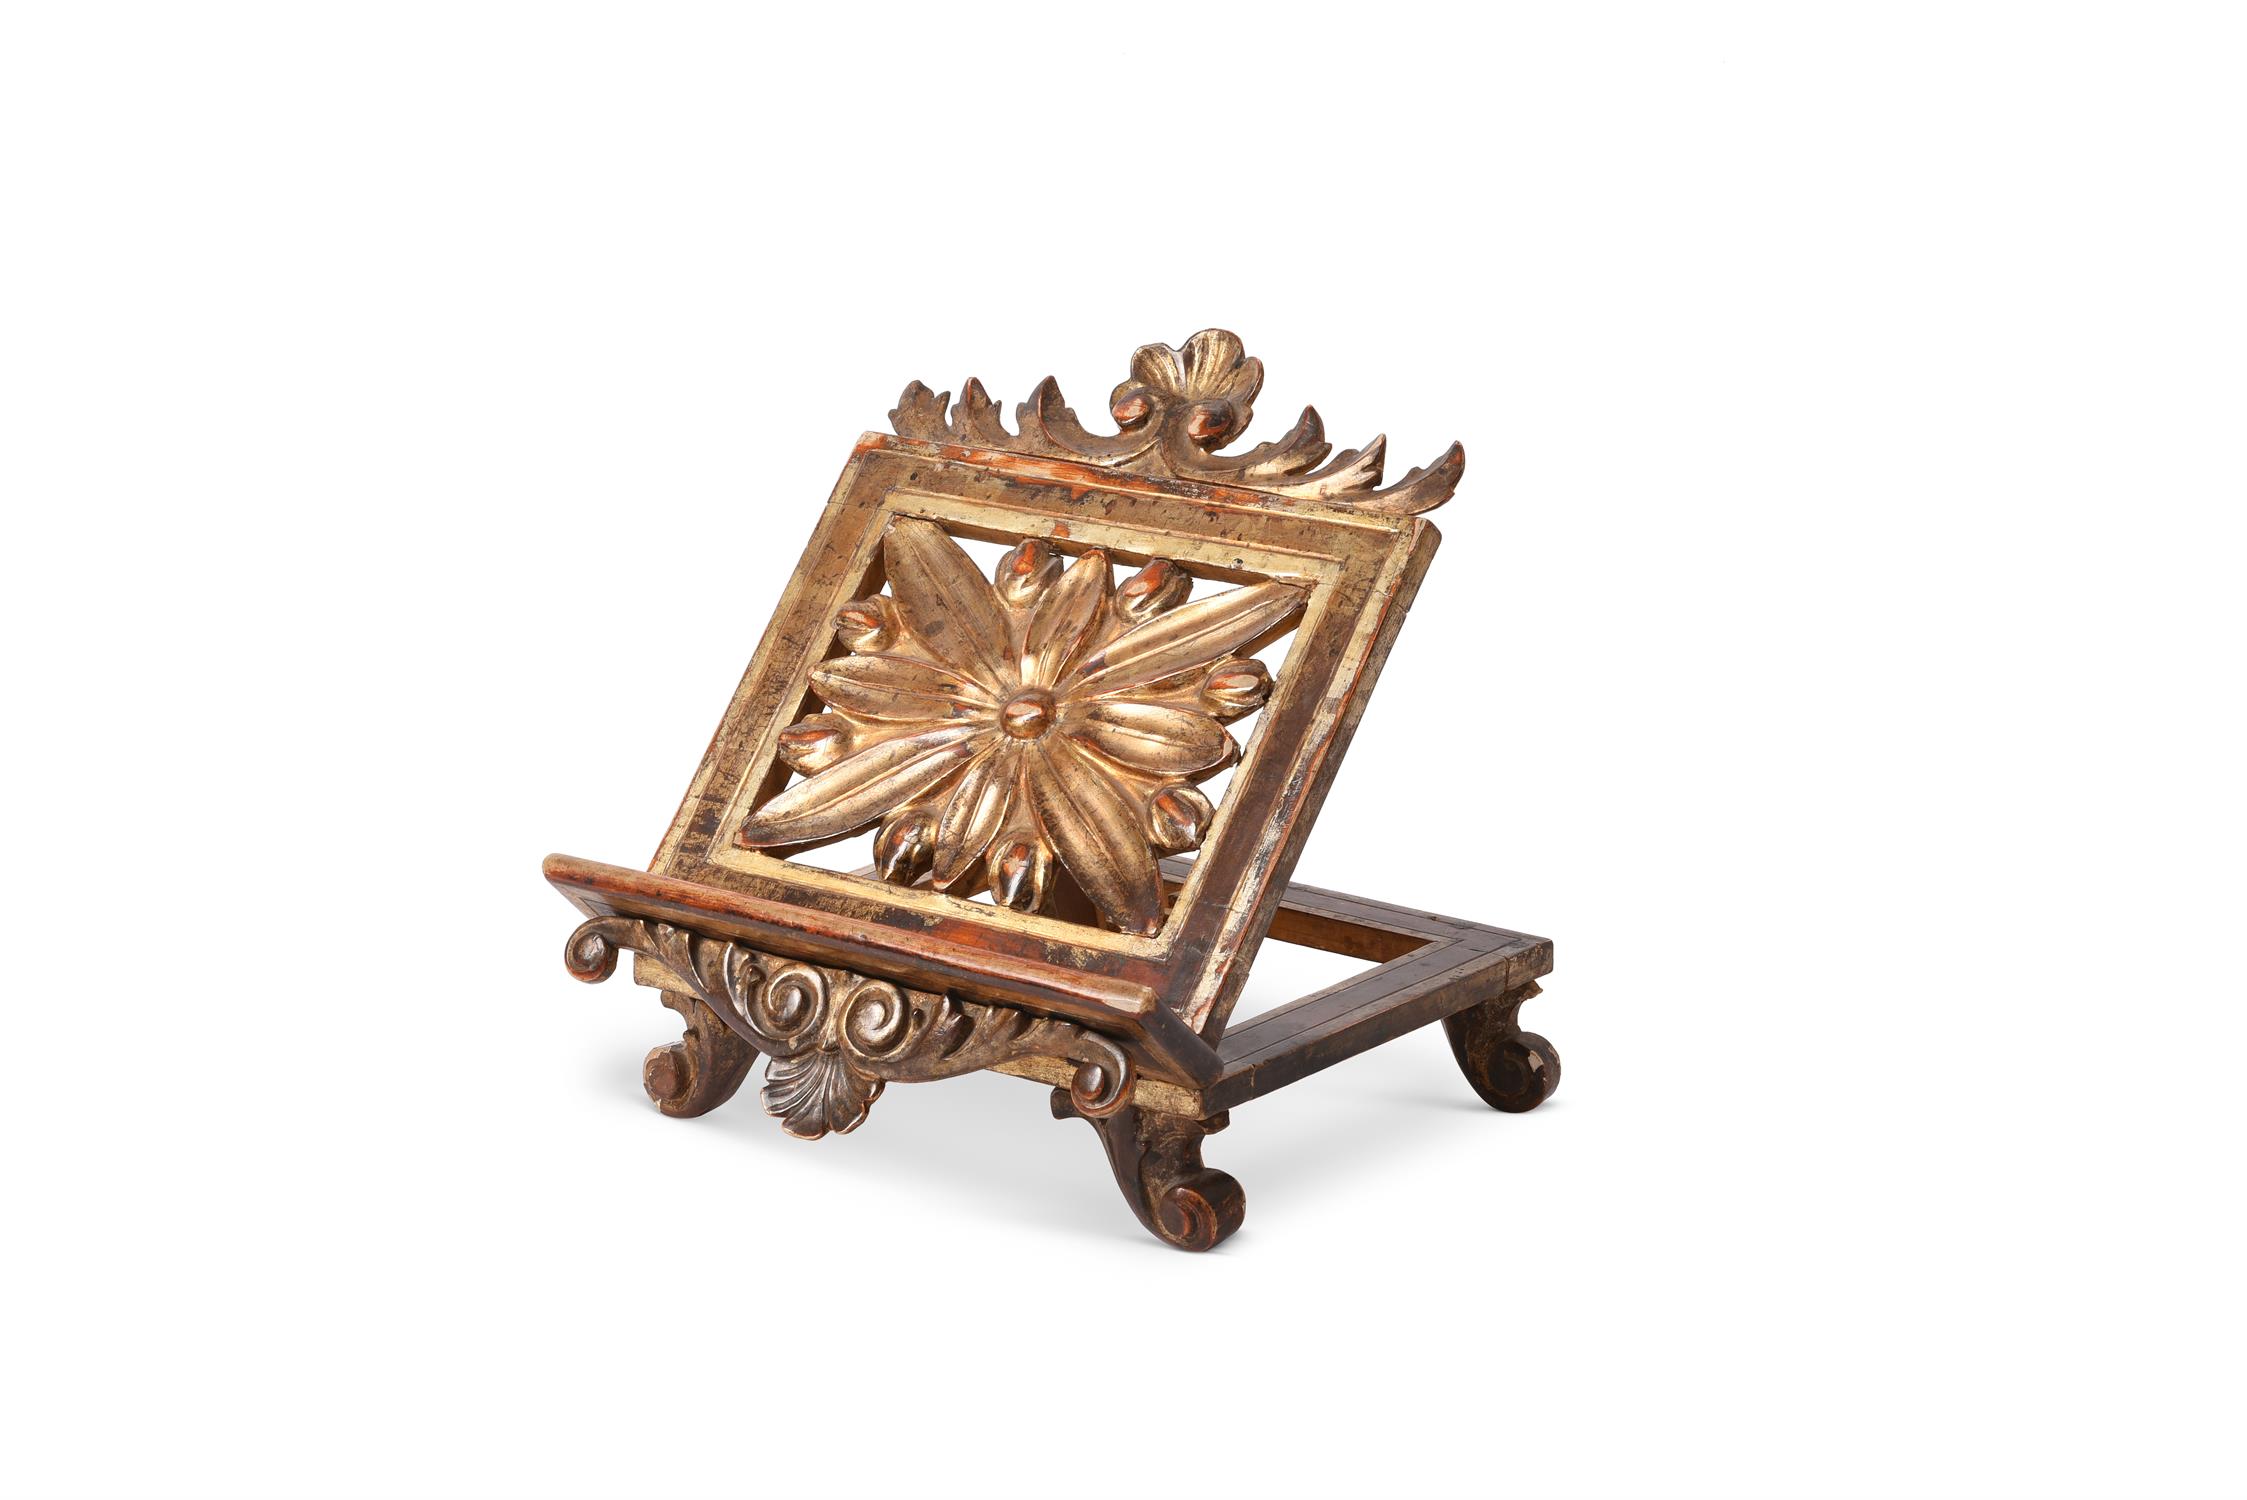 A North European carved oak and wrought iron bound offertory or alms box, 17th century - Image 3 of 10